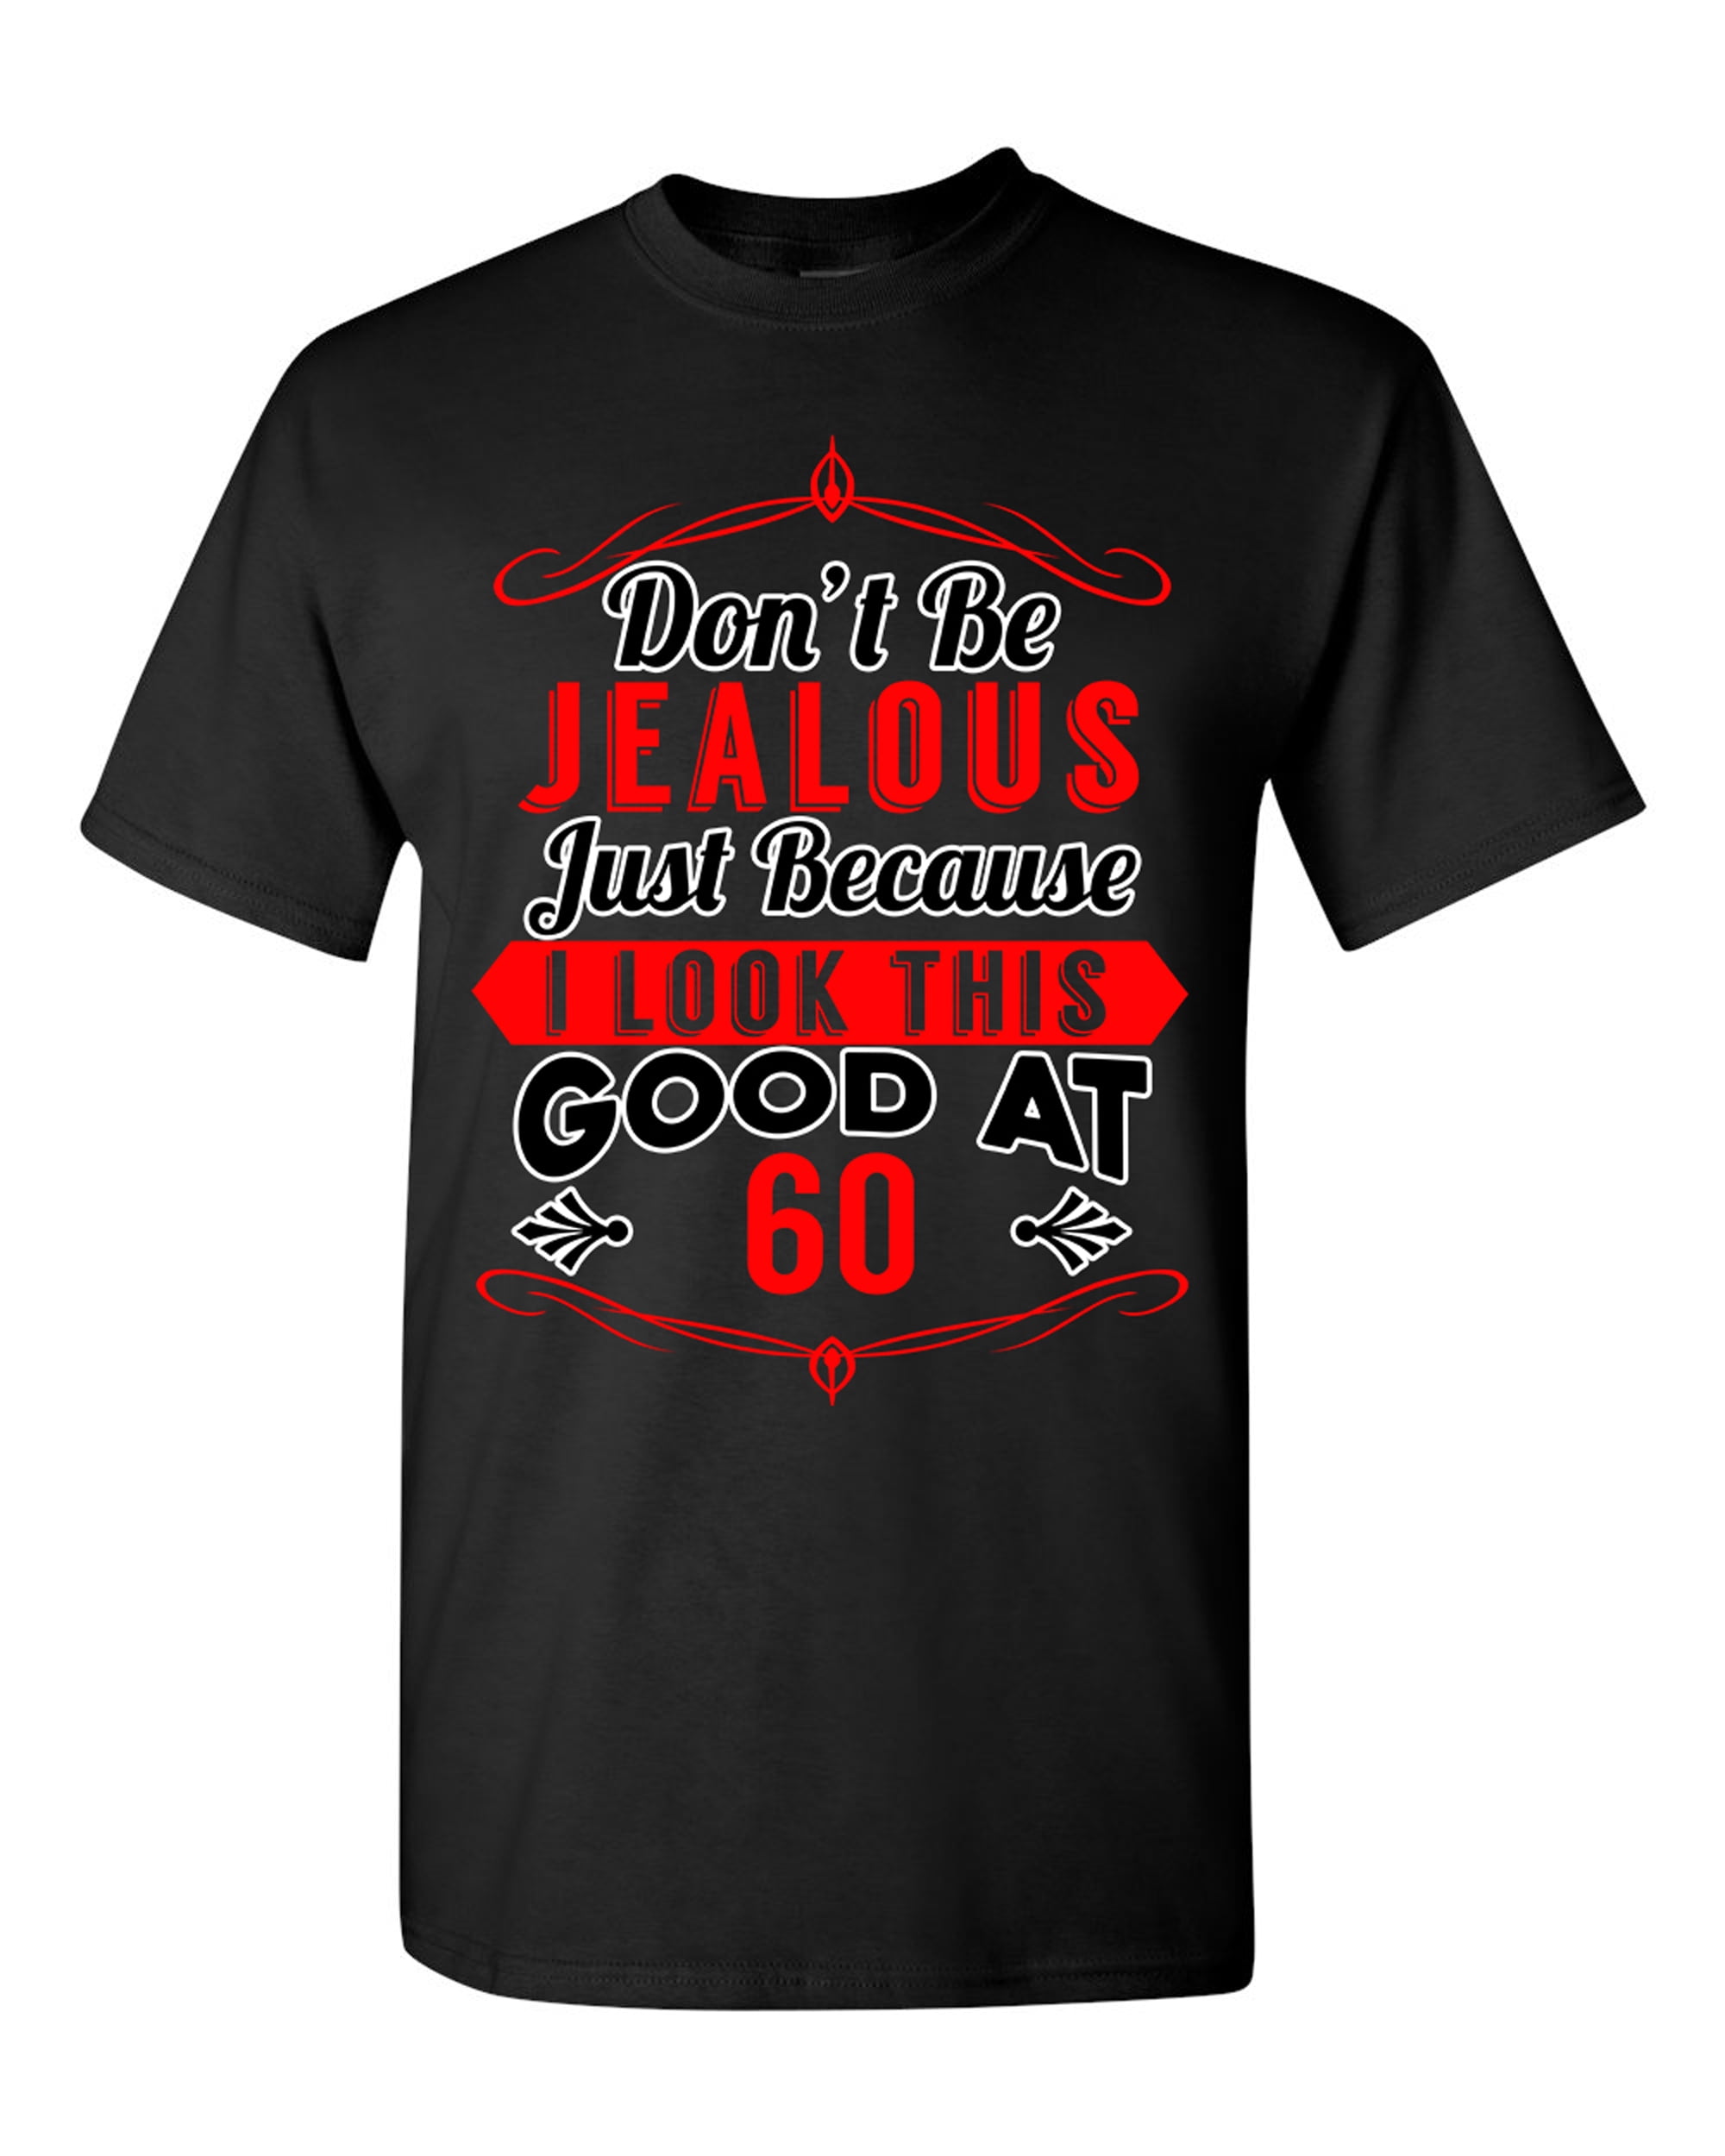 Don't Be Jealous Just Because I Look This Good At 60 Funny DT Adult T-Shirt  Tee